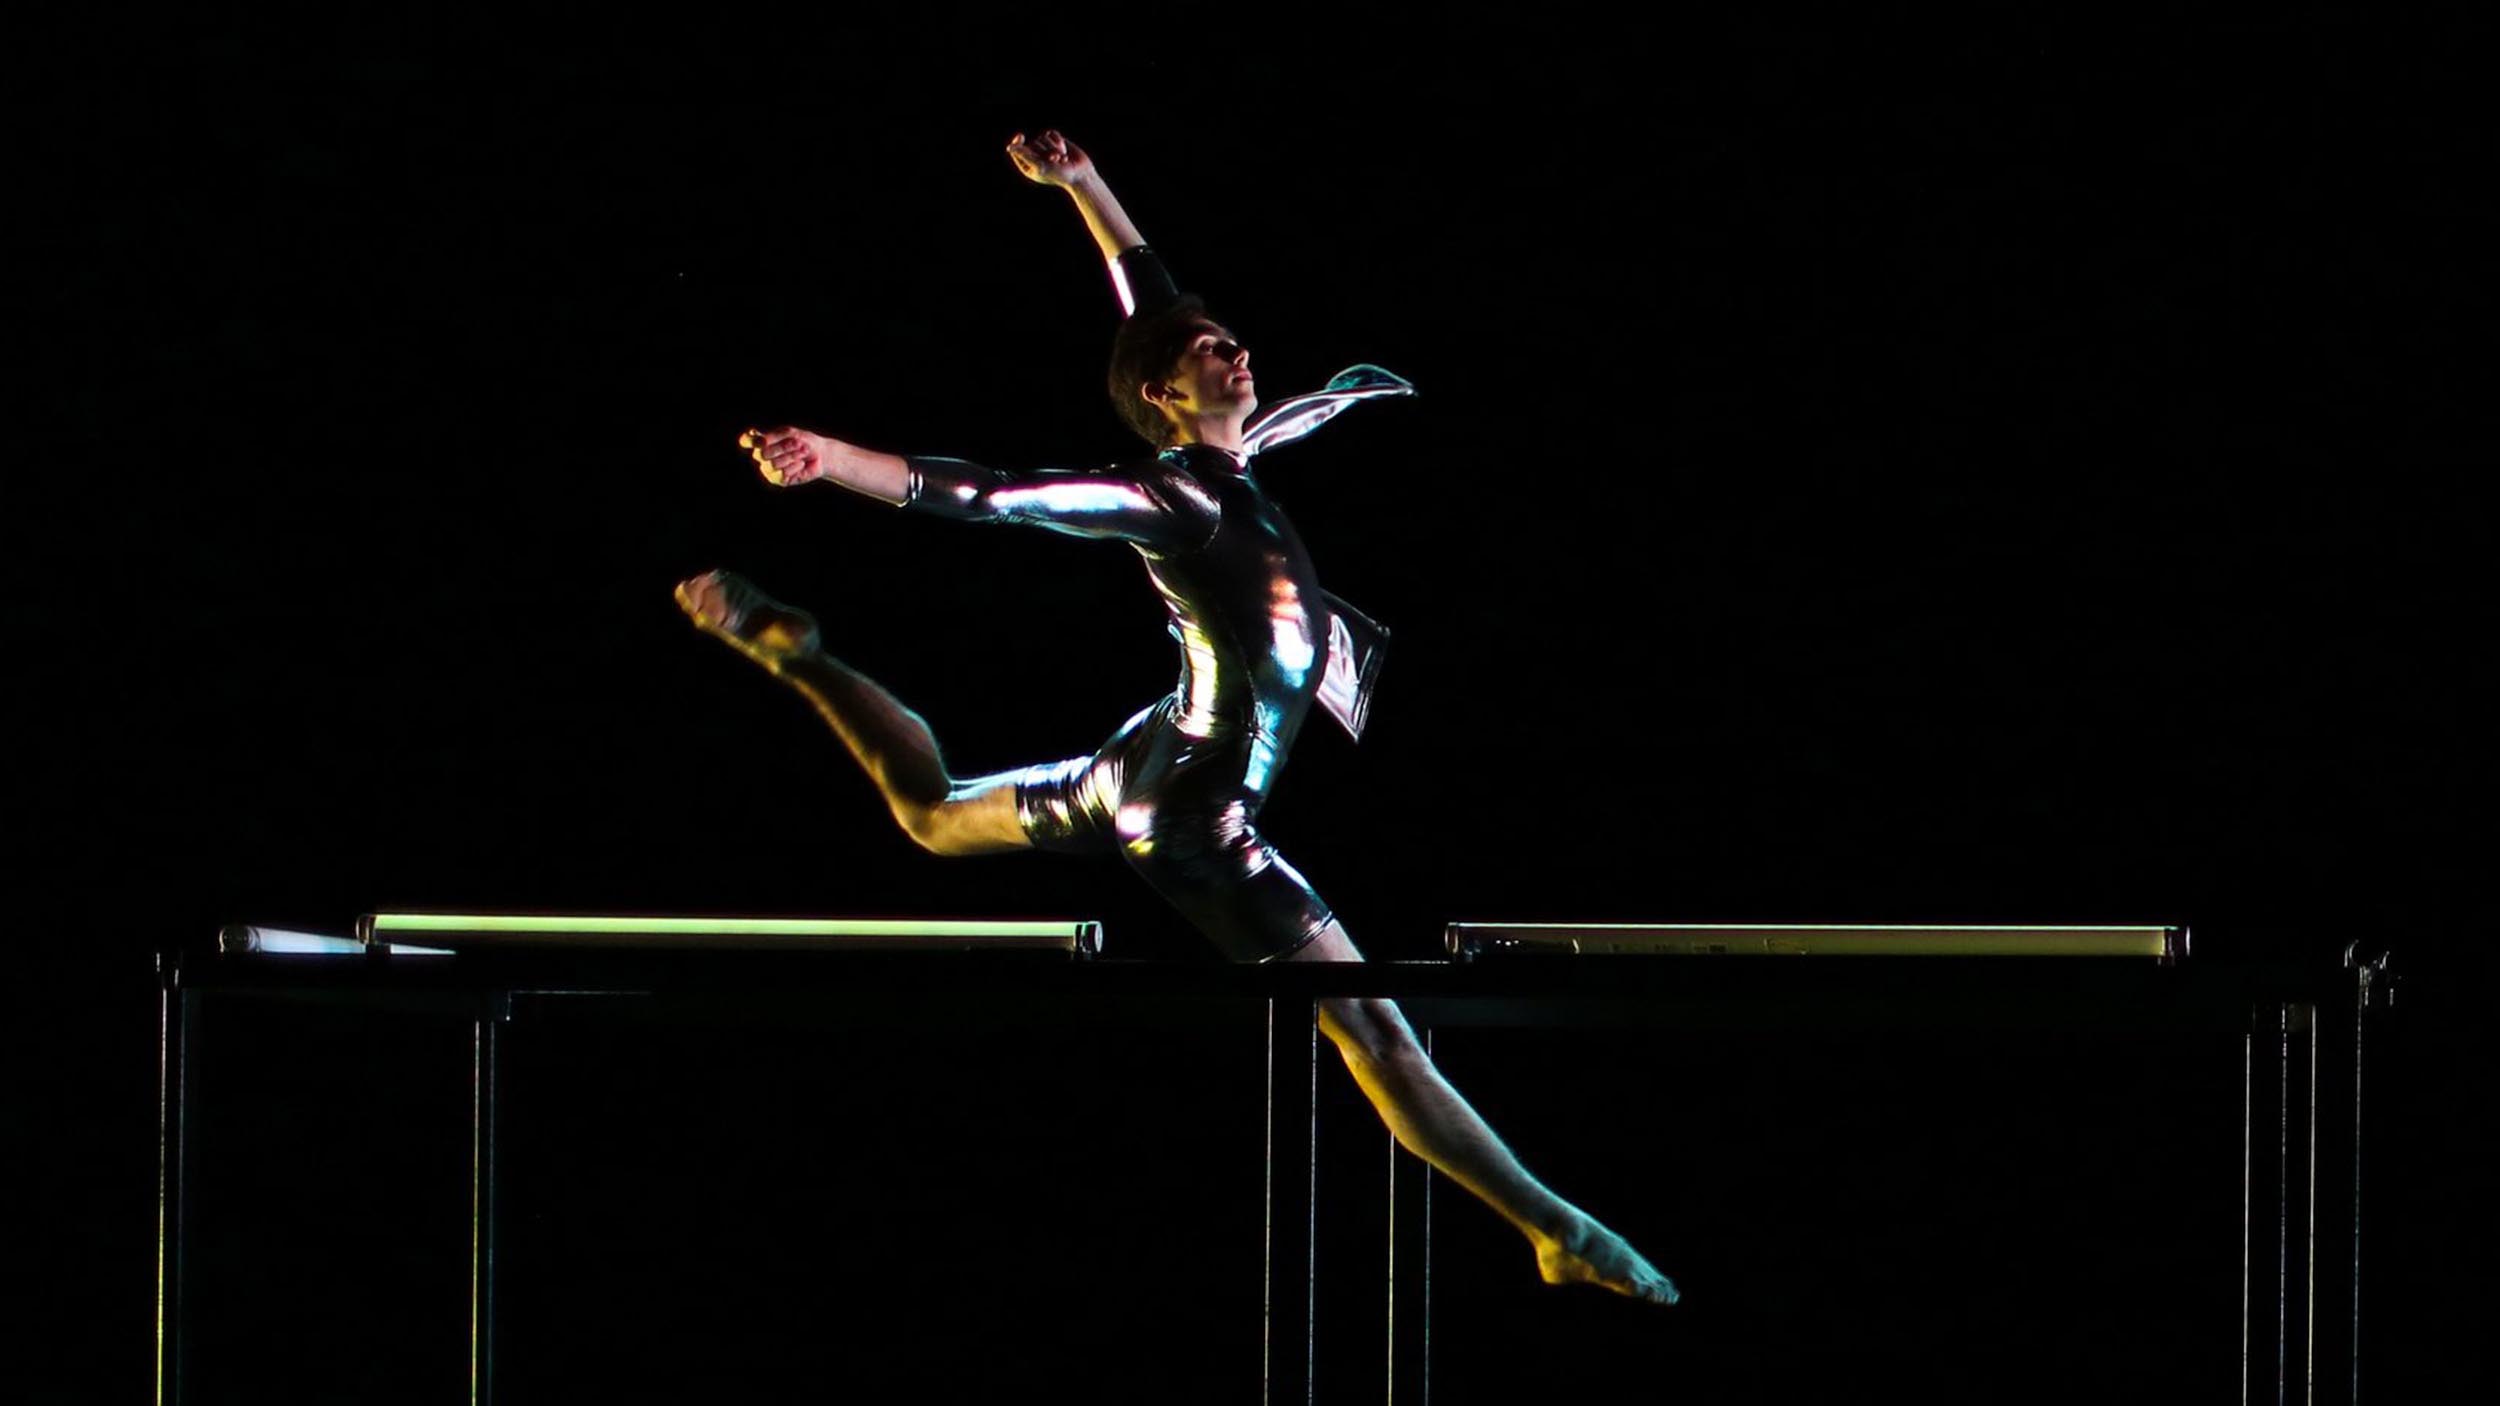 Sequential Disintergration - ‘Flight’ breaks away from the mechanical status quo and takes wing in this dance piece.